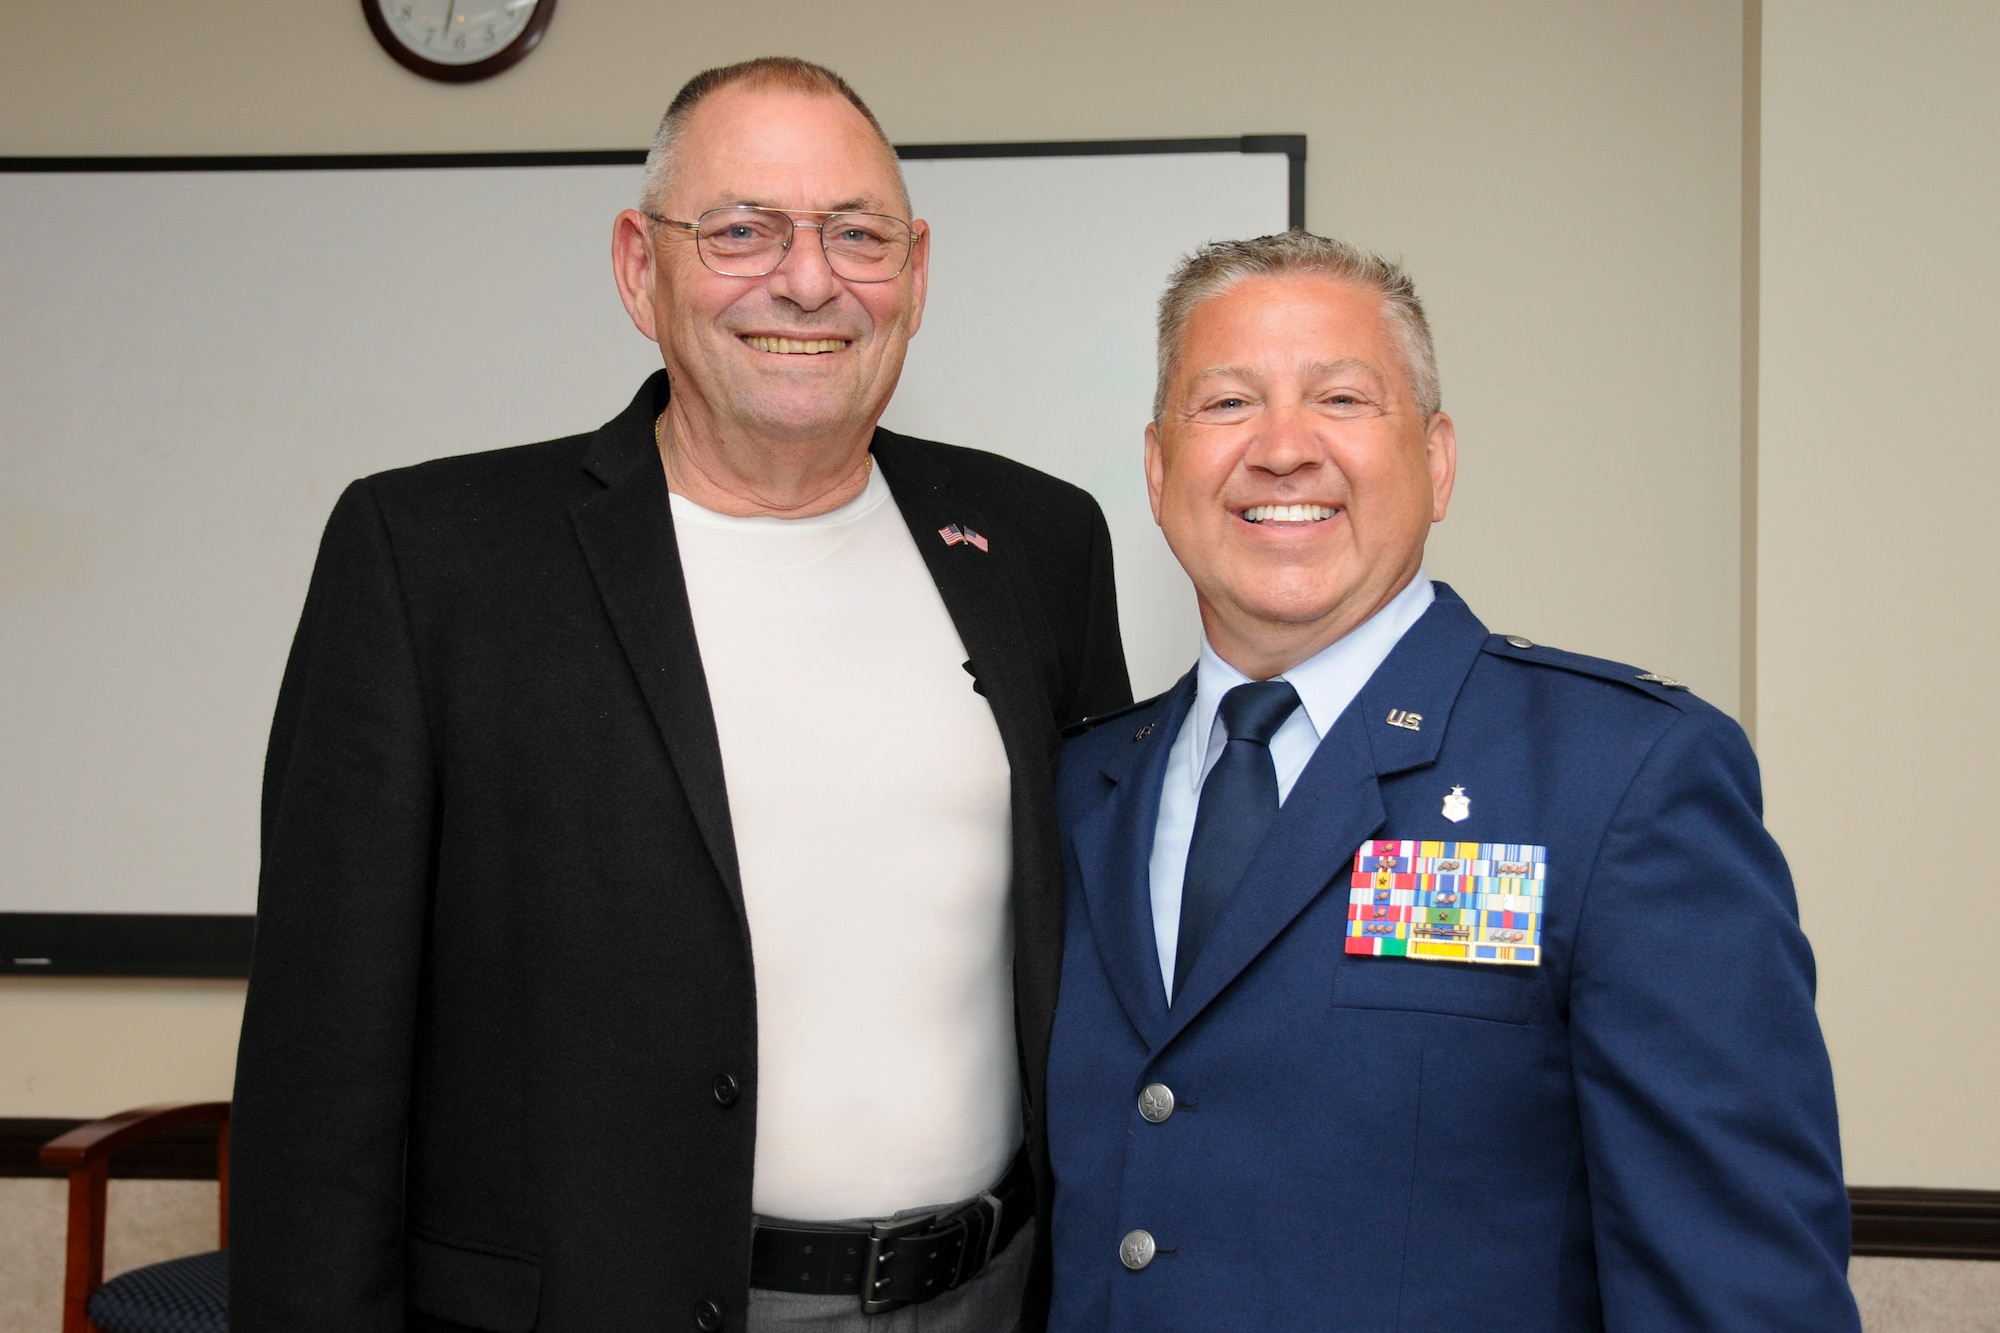 Col. Scott Blum, 108th Medical Group commander, poses for a photograph with retired Col. Barry Johnson after Blum's promotion ceremony at Joint Base McGuire-Dix-Lakehurst, N.J., July 7, 2014. The colonel's insignia on Blum's service coat were passed down to him starting from Col. Johnson's father, who gave them to his son, who in turned passed them on to the former Medical Group commander Col. Sandra Long who passed them on to Blum. (U.S. Air National Guard photo by Senior Airman Kellyann Novak/Released)